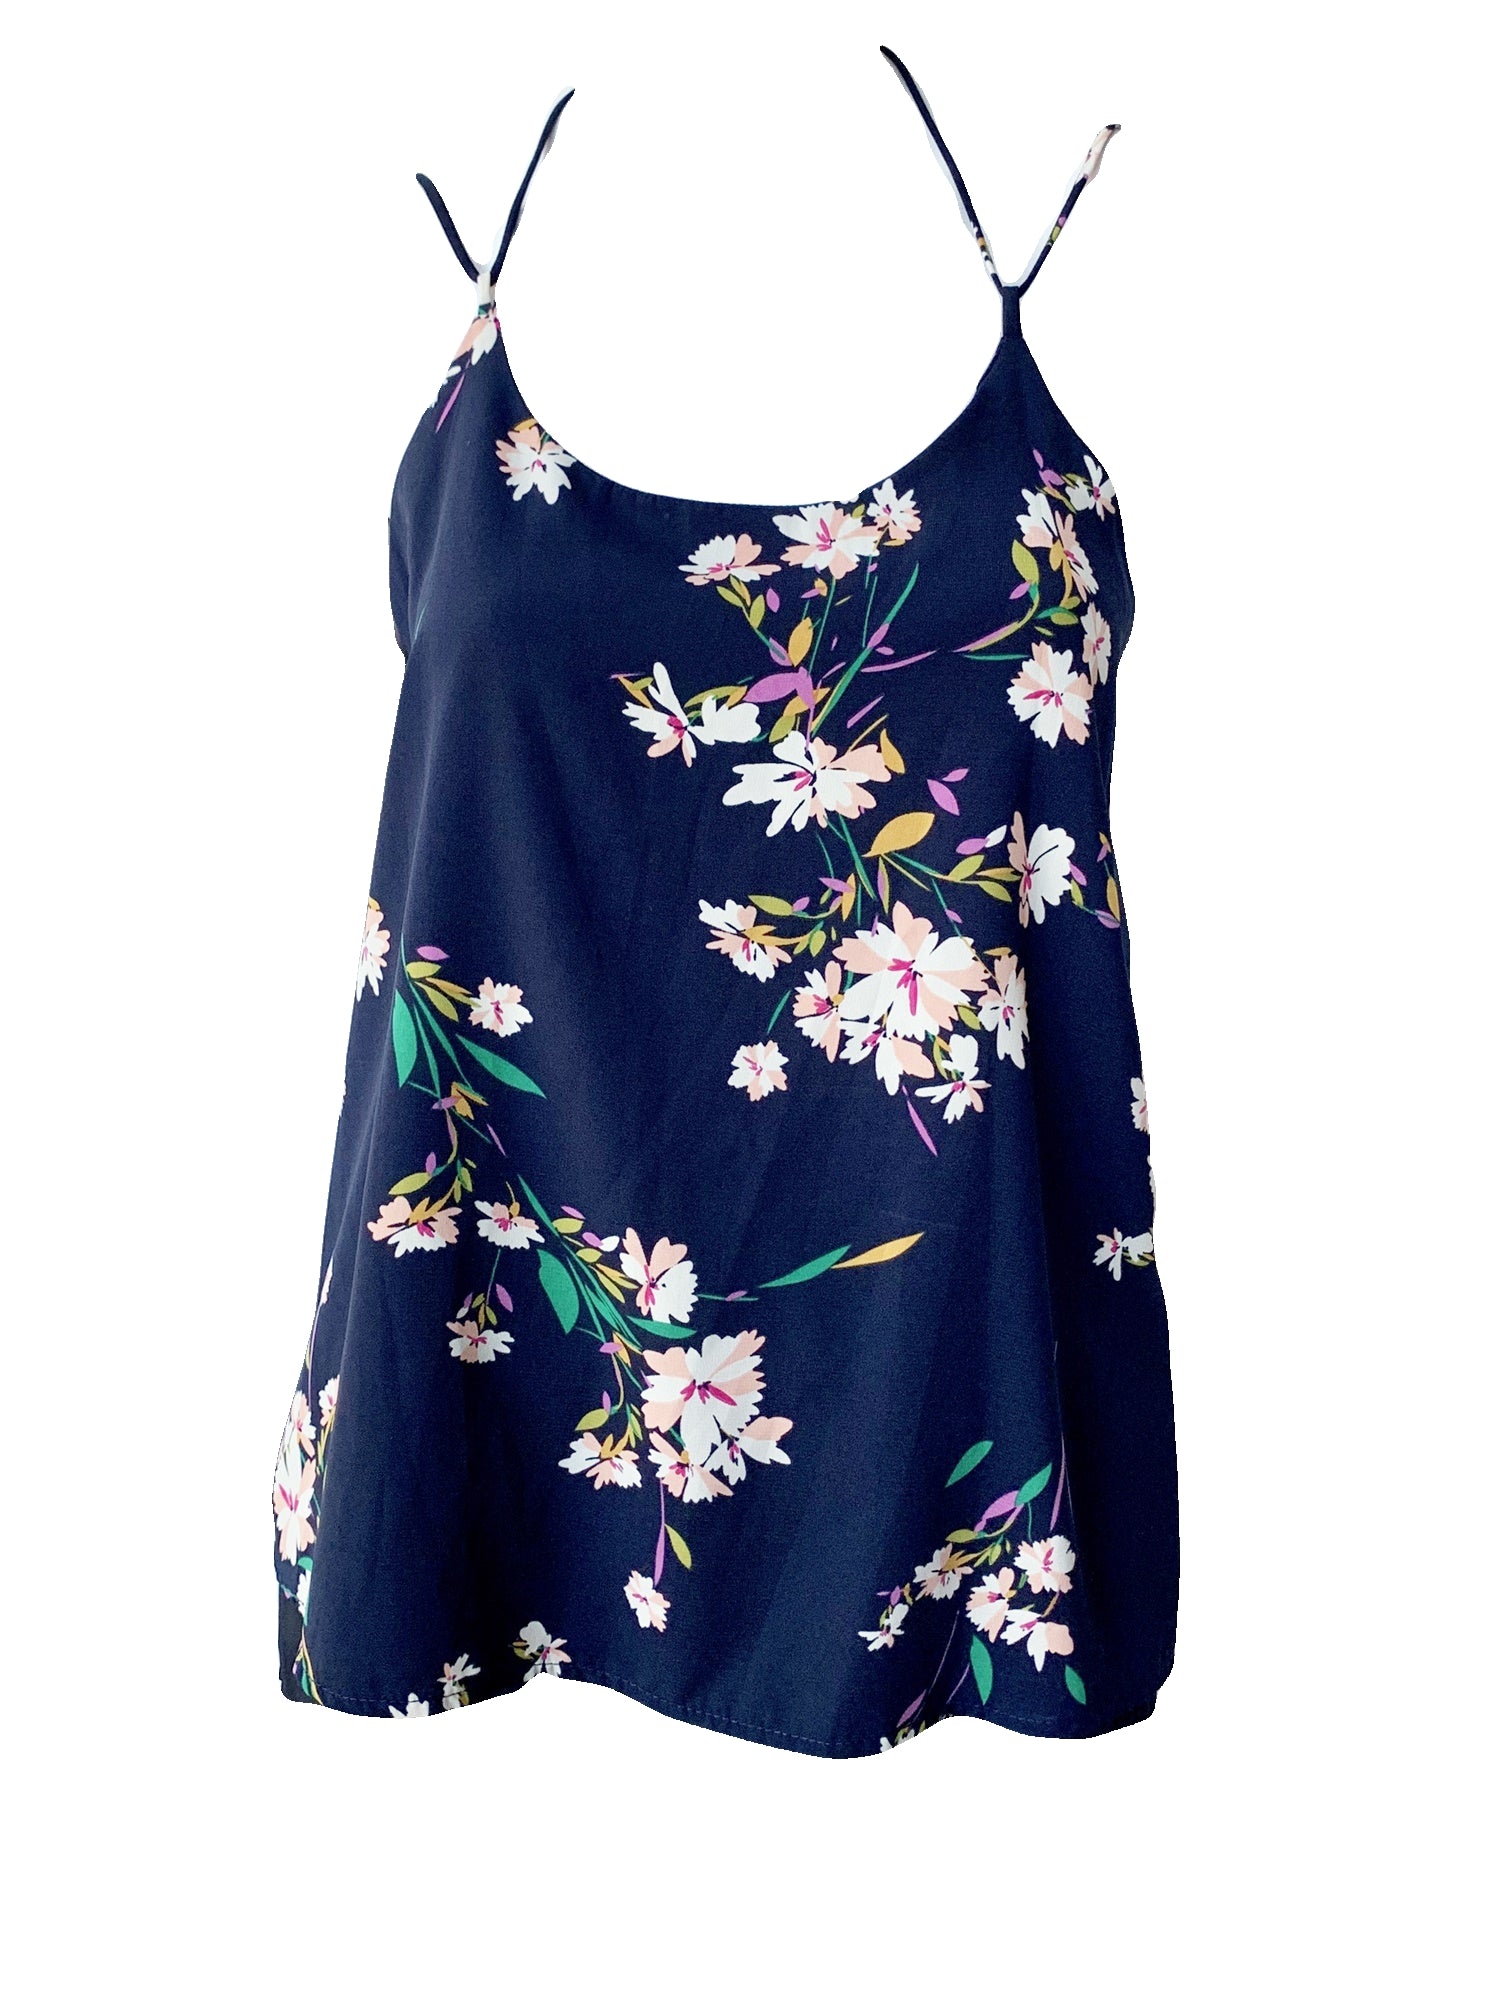 Floral Camisole Size Small